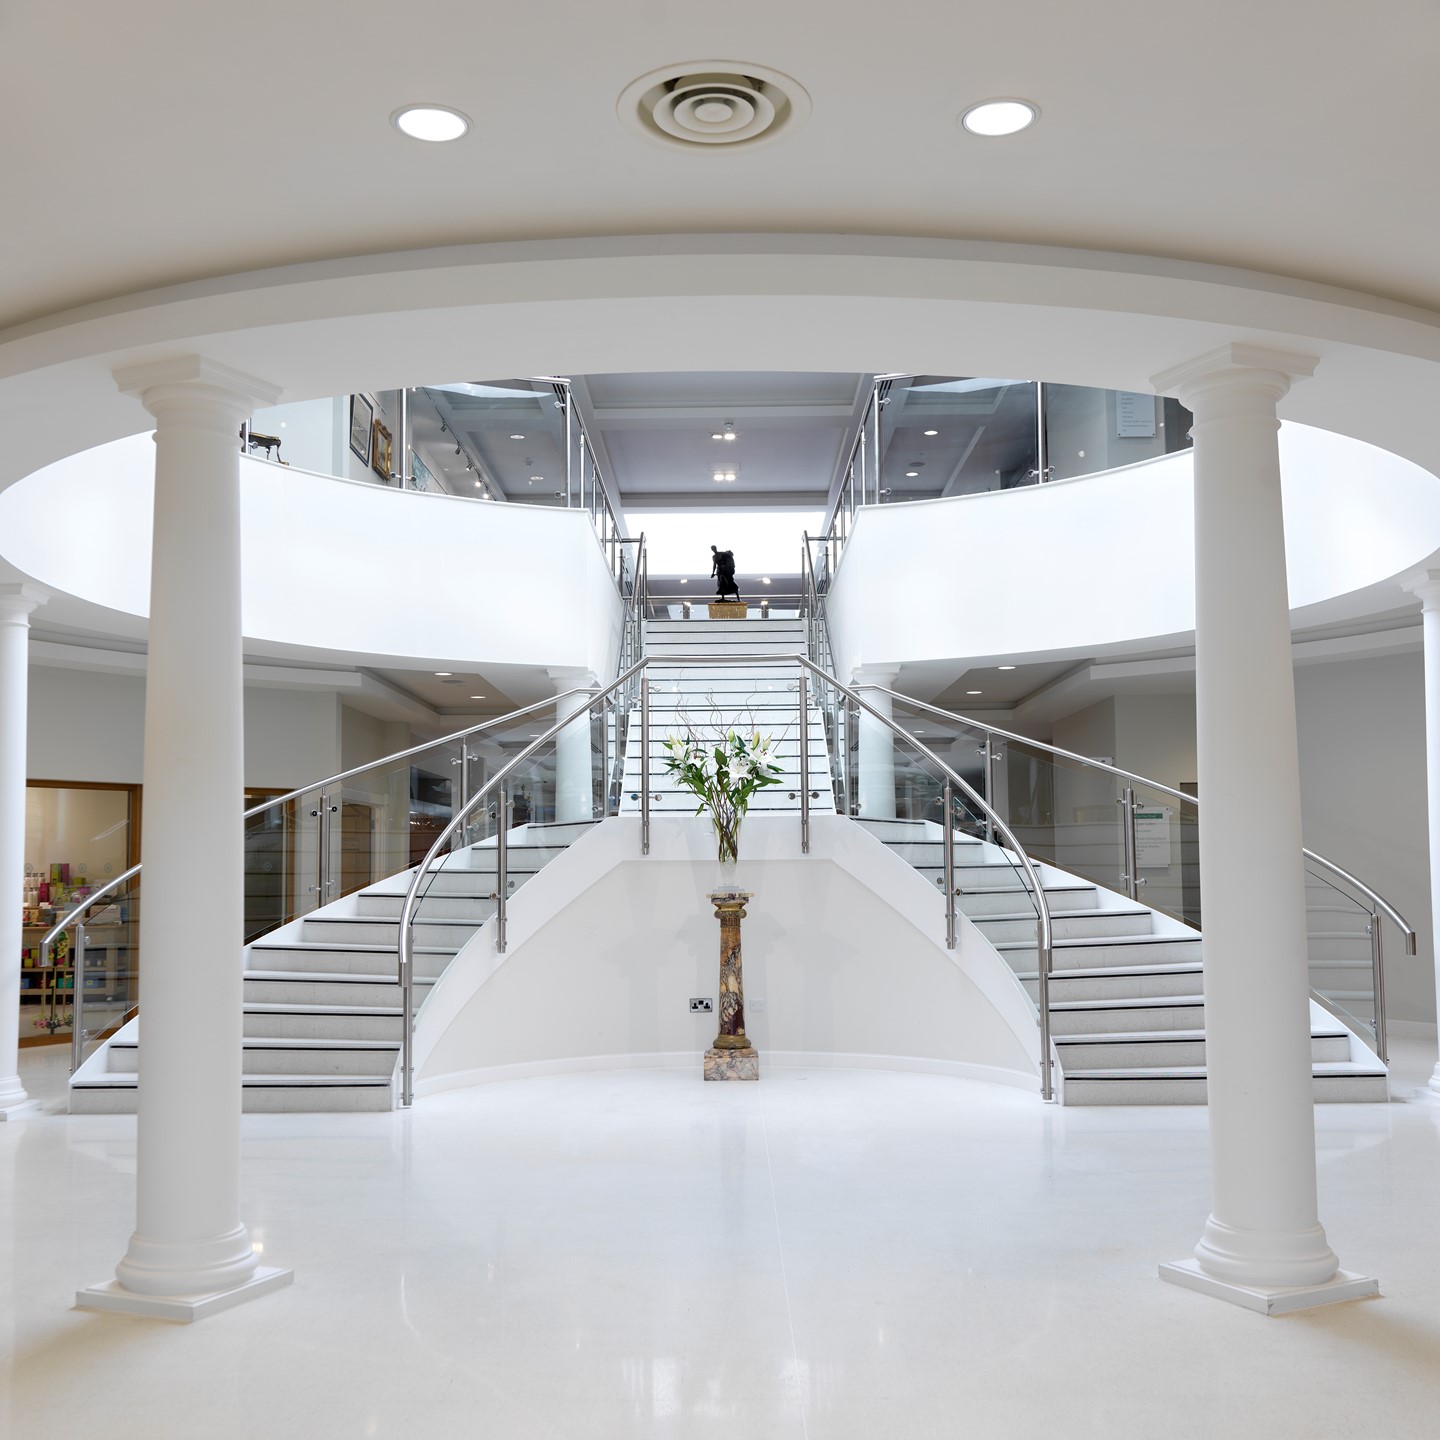 Garden Rooms entrance in the reception area, with the double staircase and white pillars